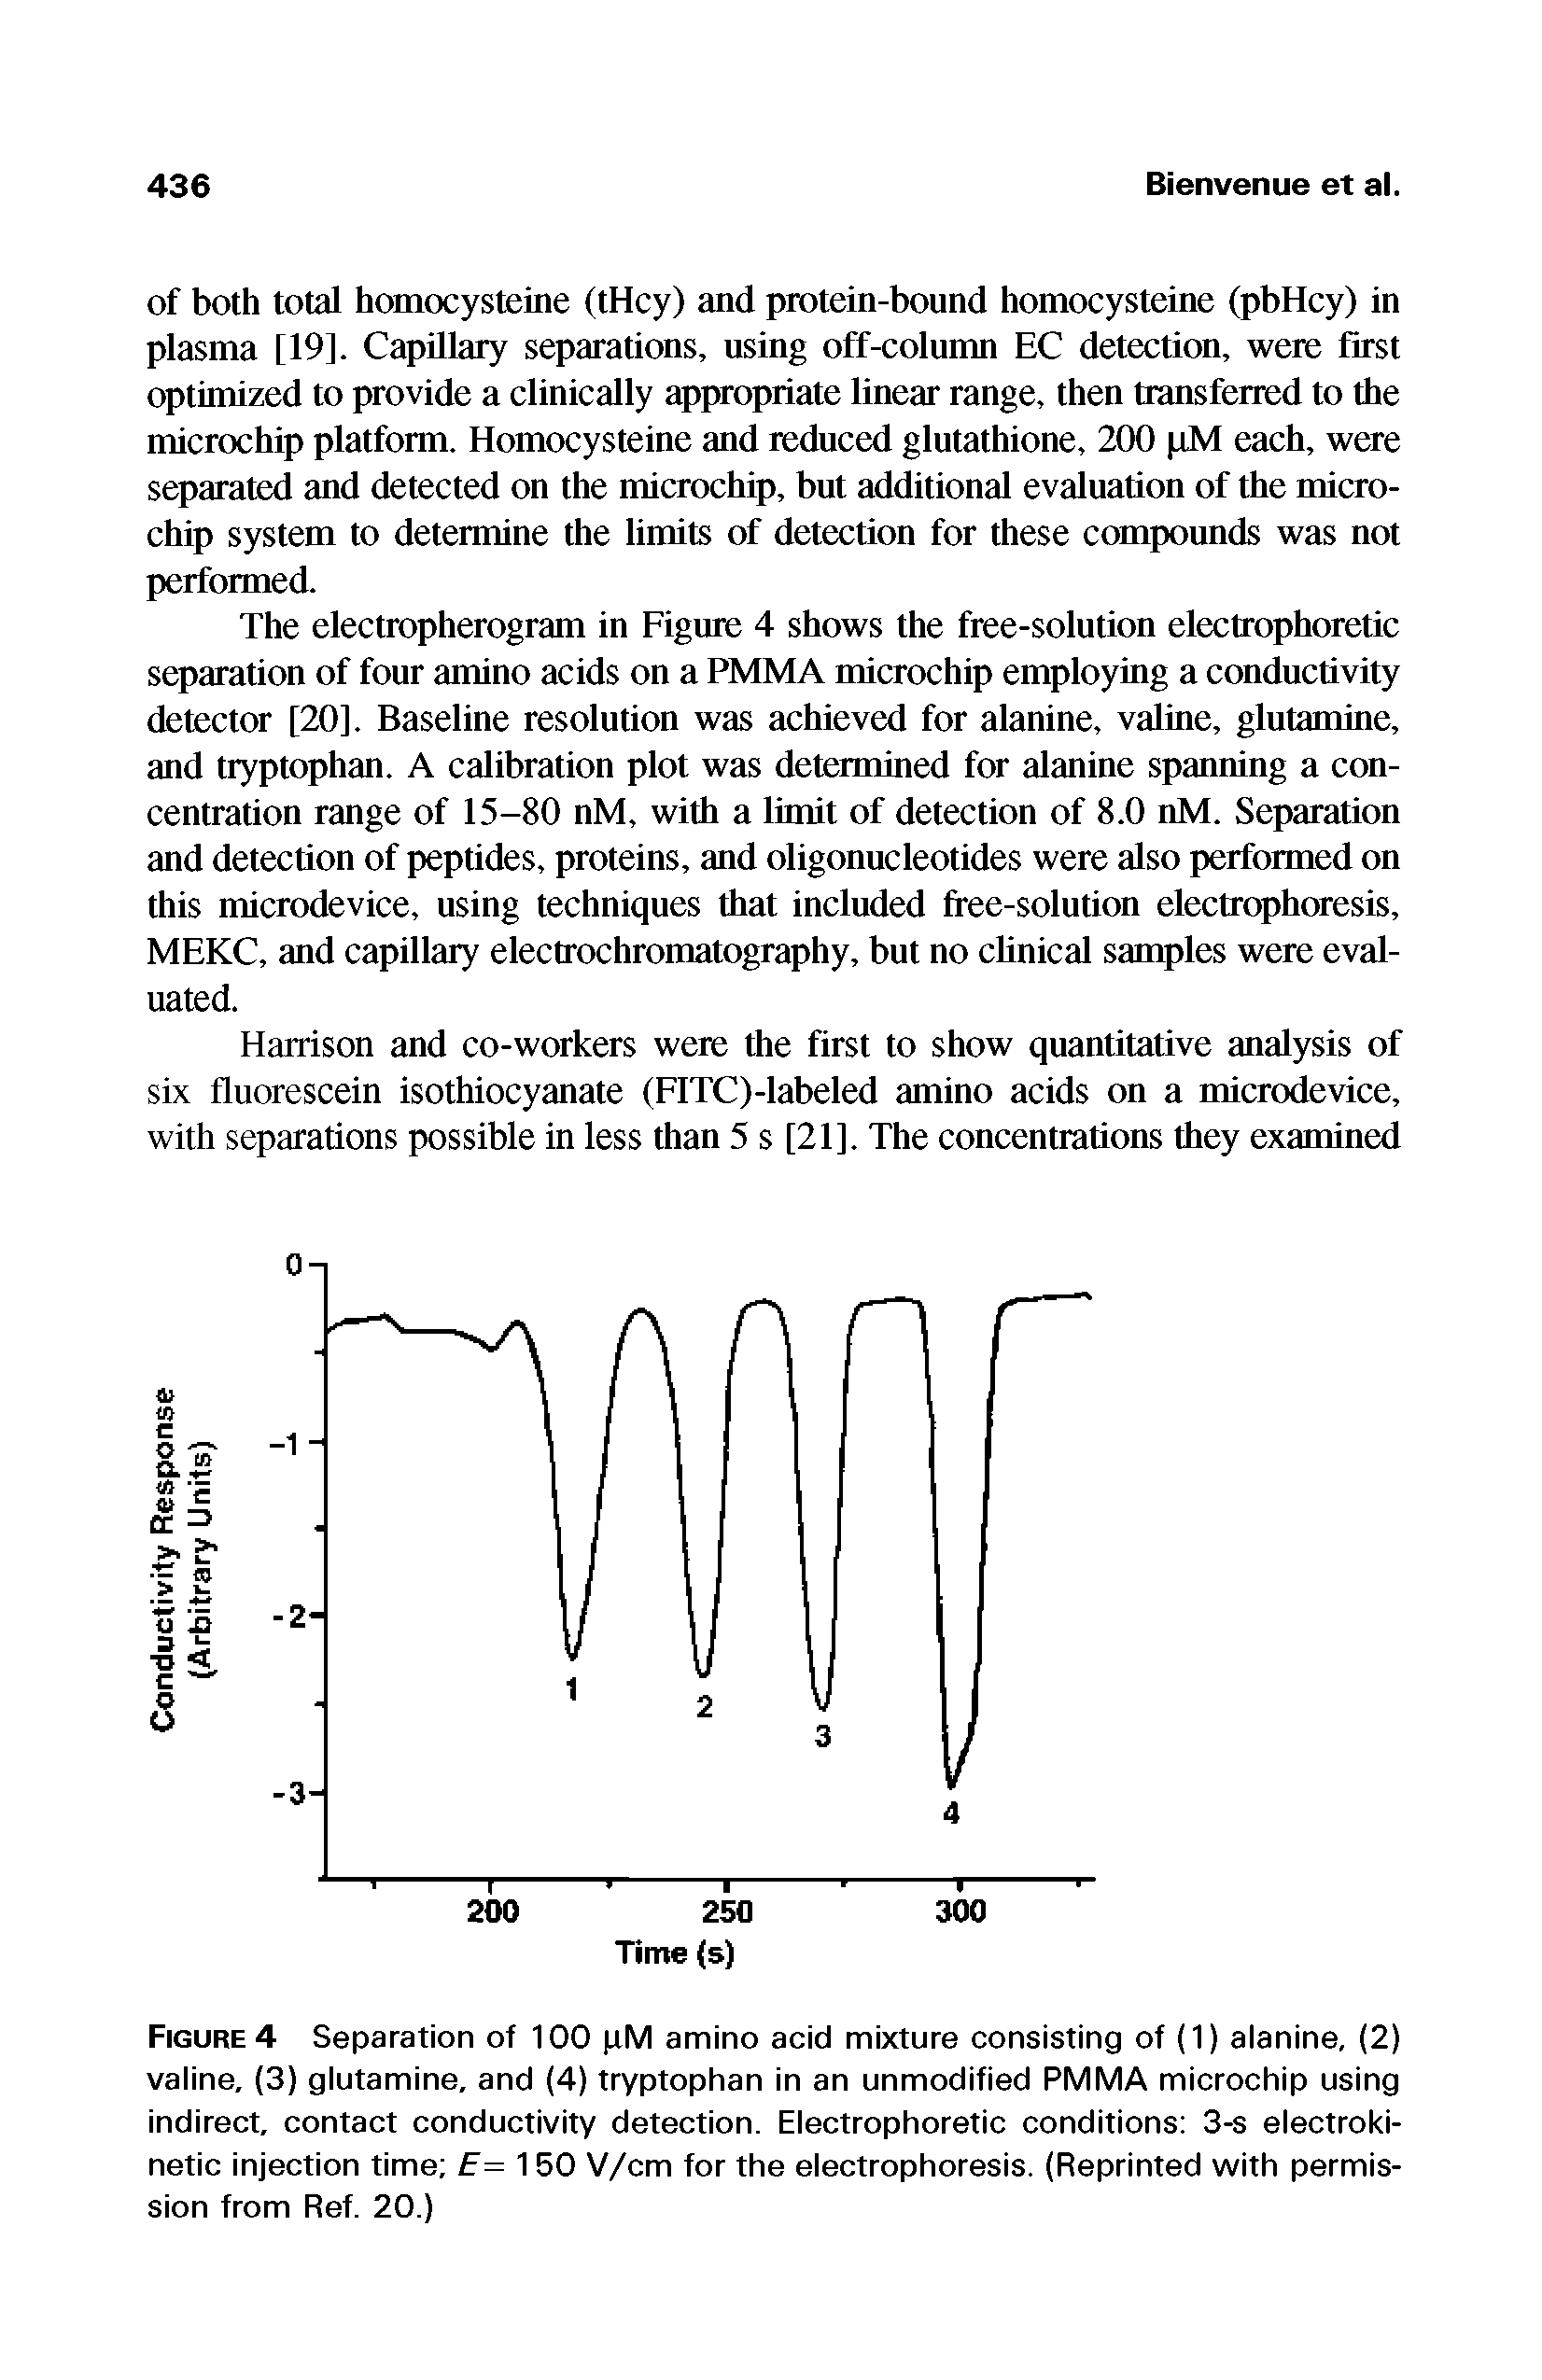 Figure 4 Separation of 100 pM amino acid mixture consisting of (1) alanine, (2) valine, (3) glutamine, and (4) tryptophan in an unmodified PMMA microchip using indirect, contact conductivity detection. Electrophoretic conditions 3-s electroki-netic injection time =150 V/cm for the electrophoresis. (Reprinted with permission from Ref. 20.)...